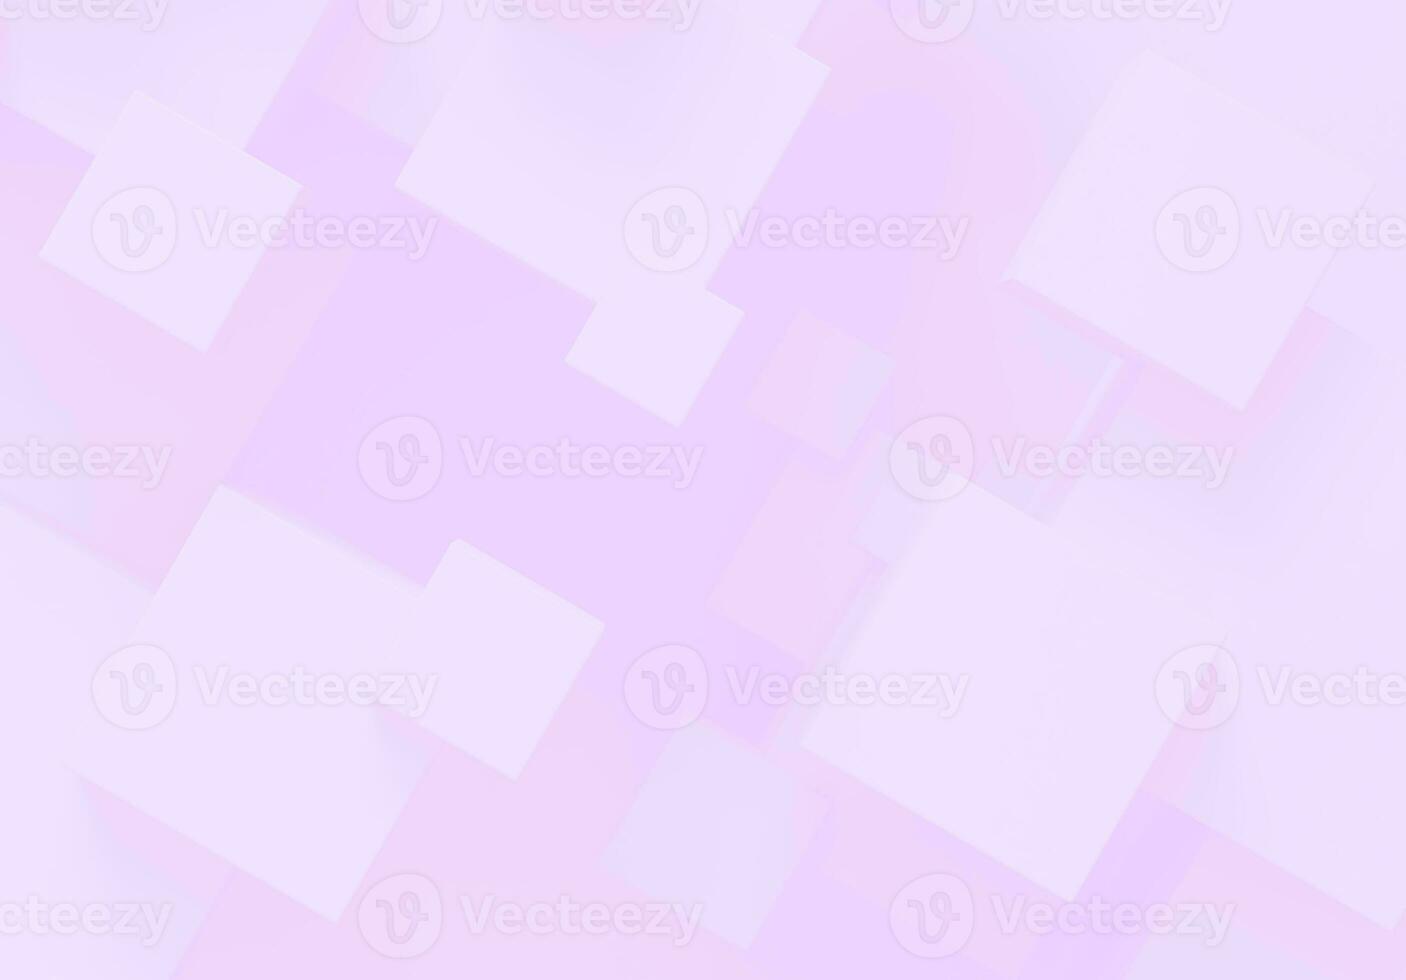 Colorful Aesthetic square background design photo